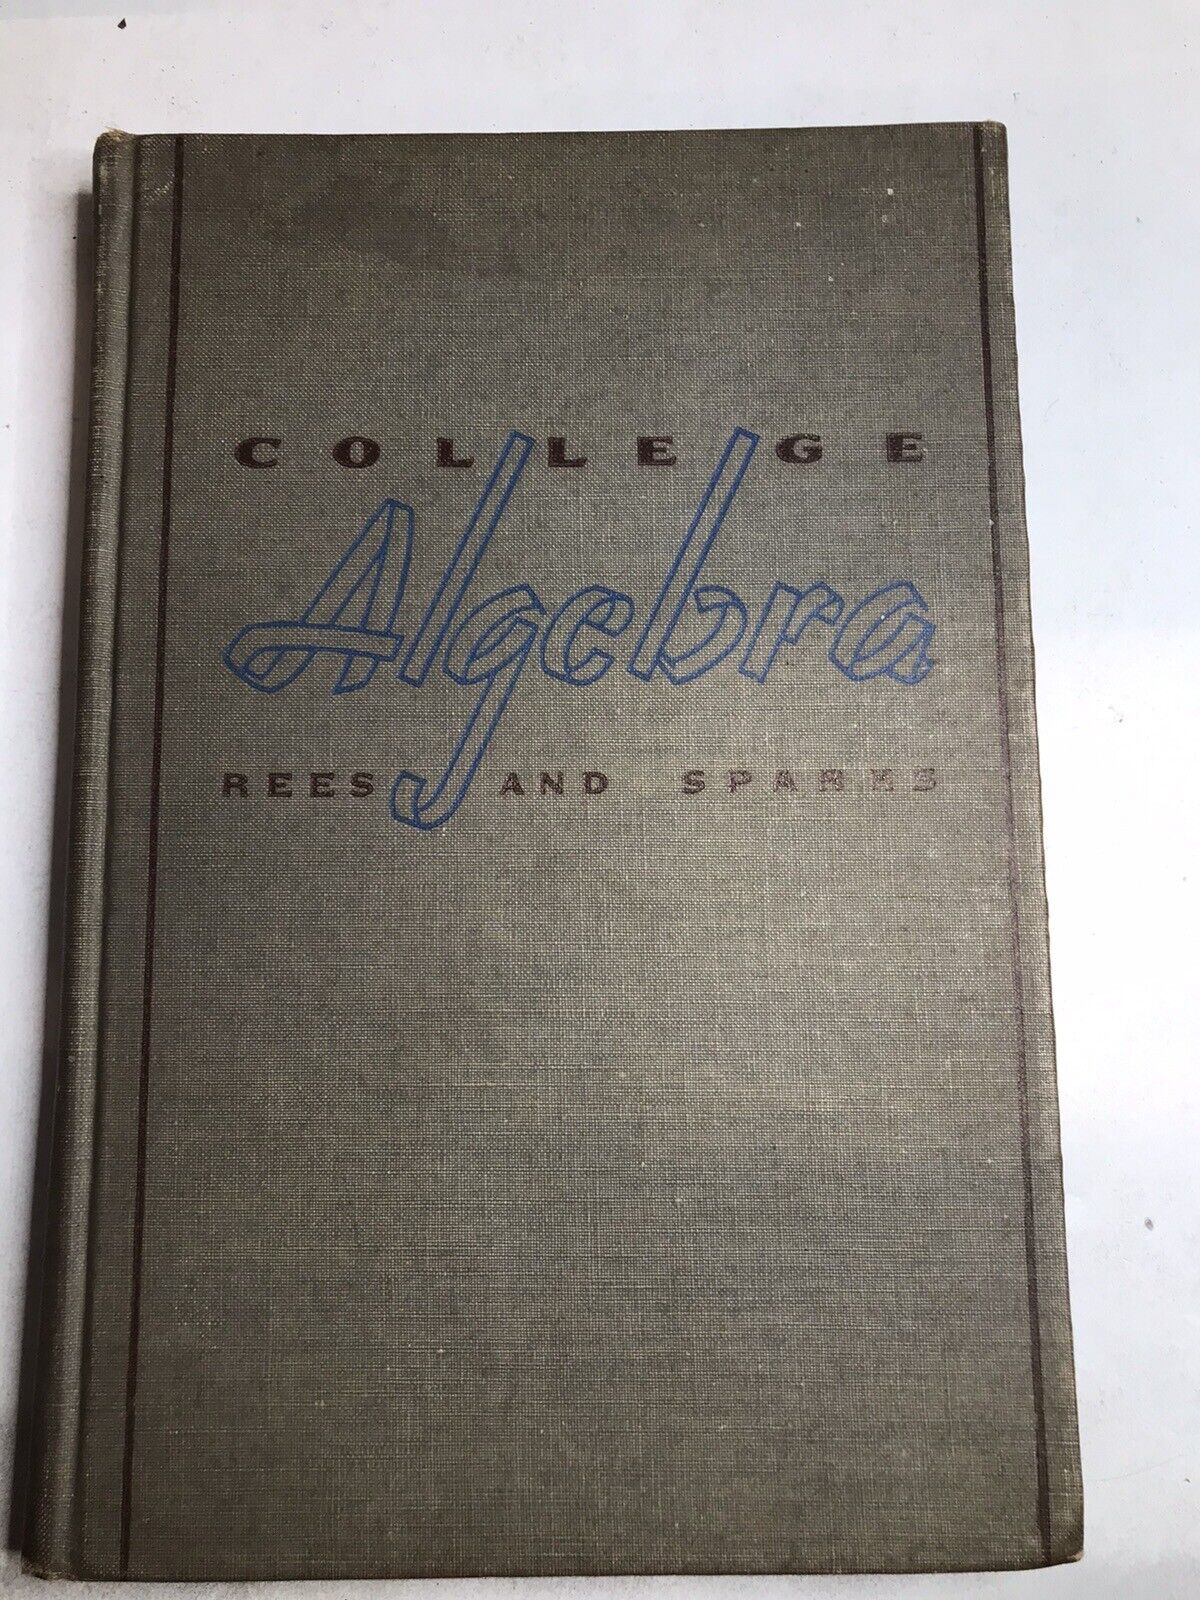 1939 College Algebra Rees And Sparks McGraw-Hill